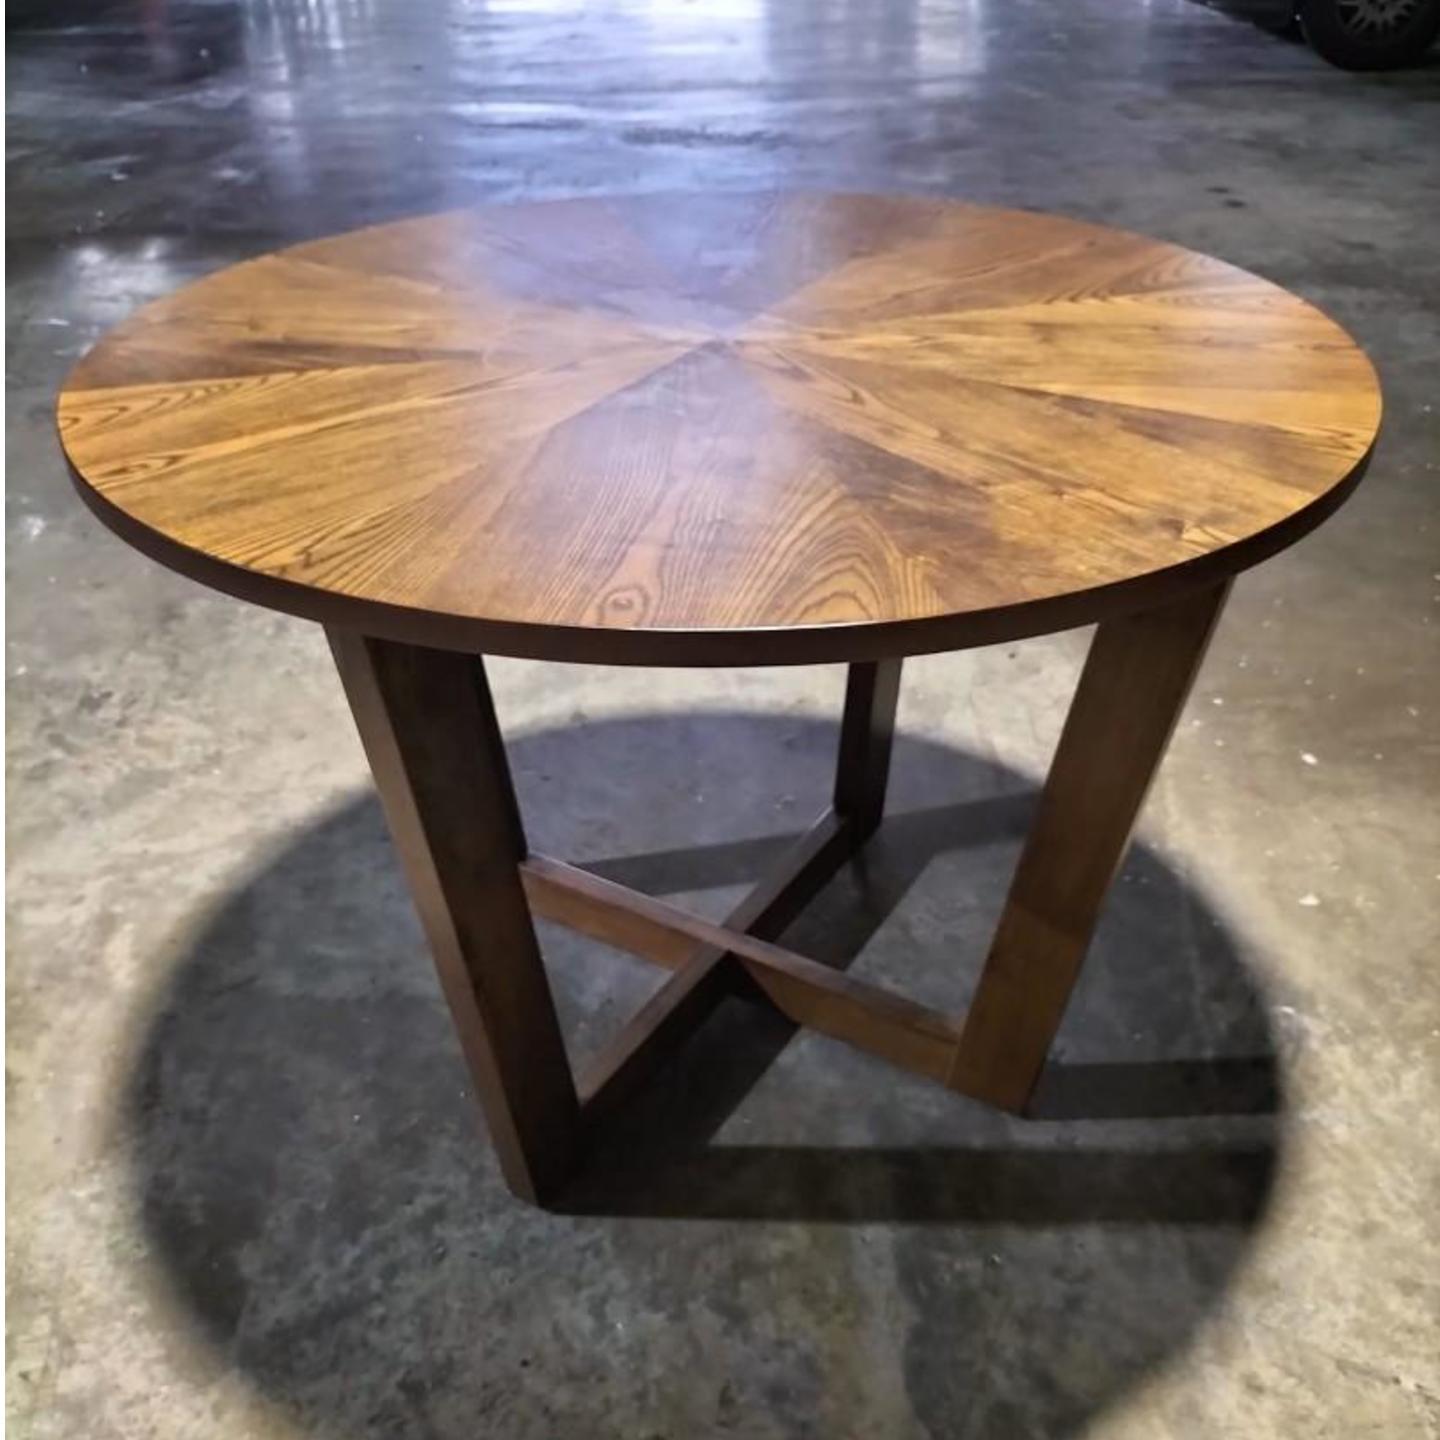 VICO Round Dining Table in WALNUT